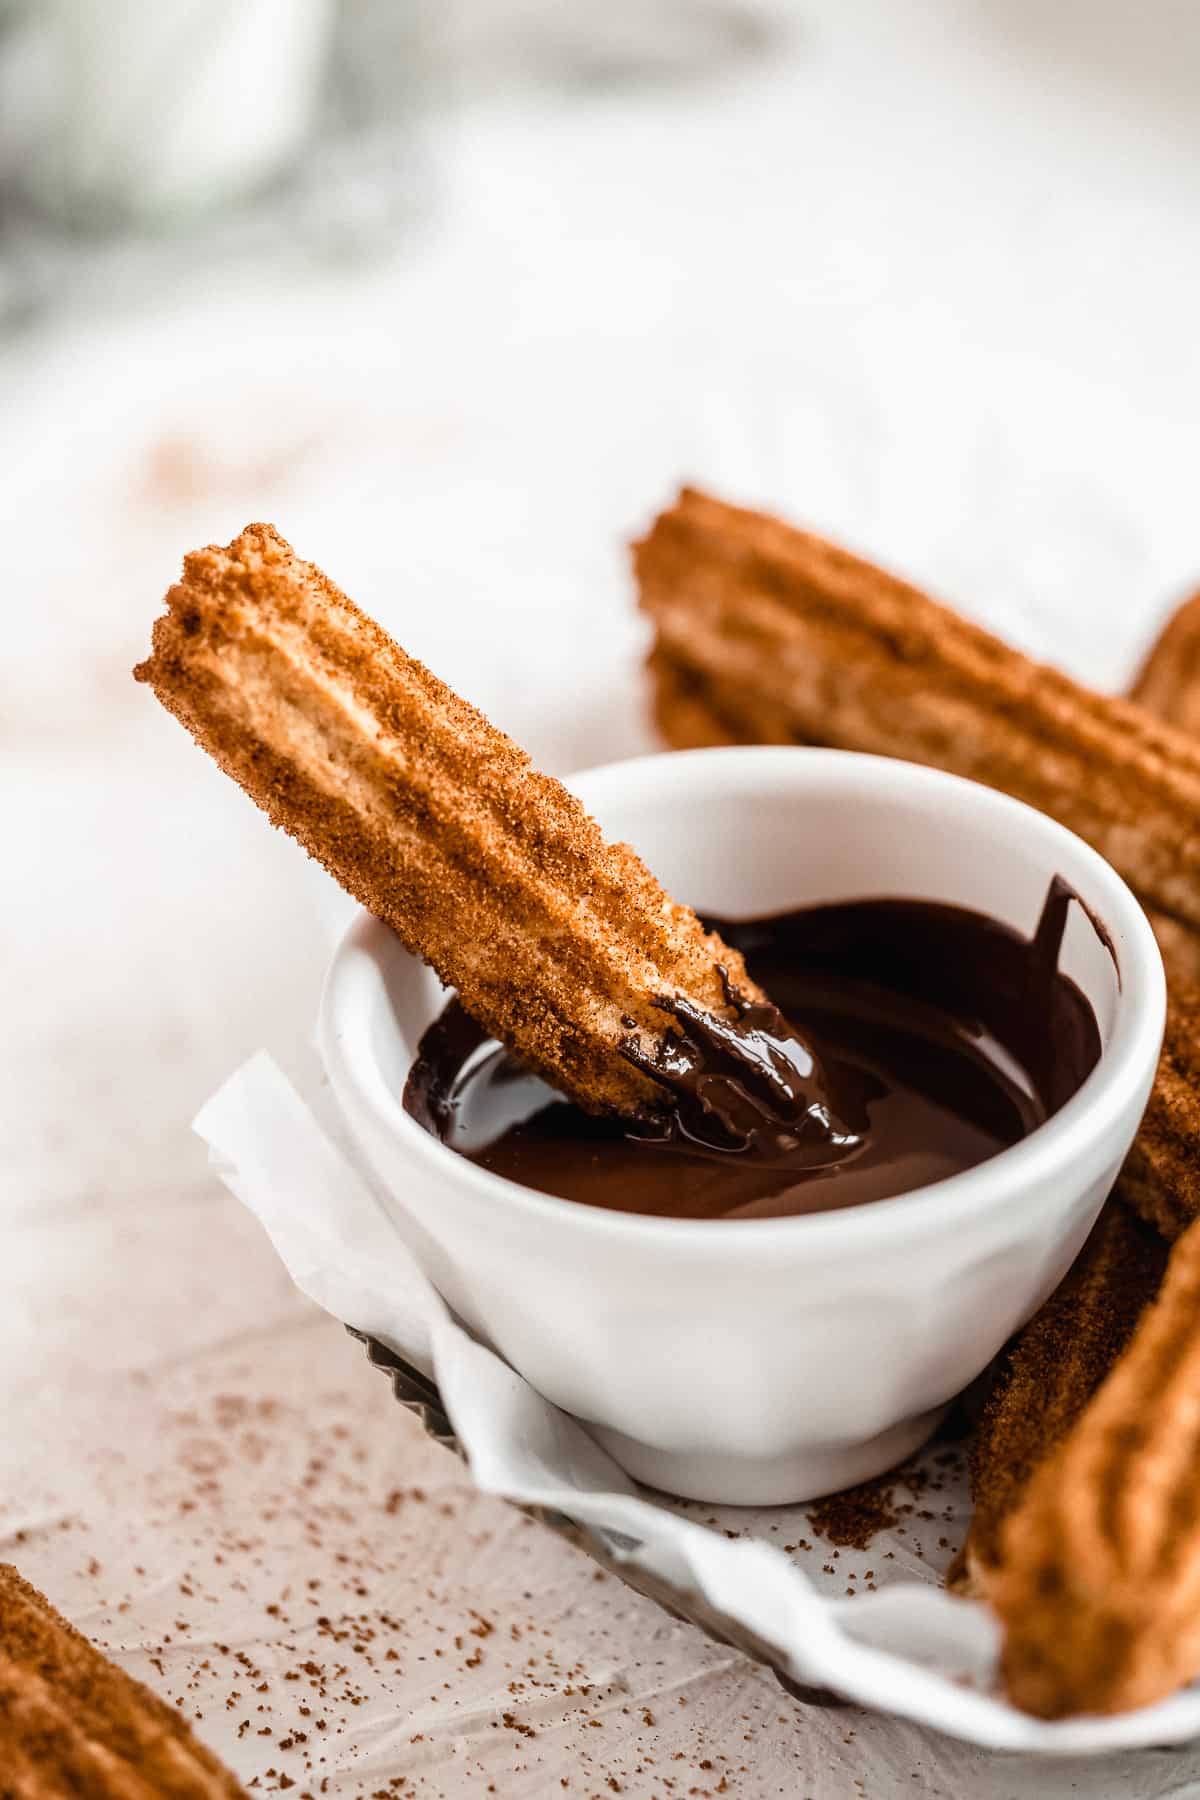 Churro resting in a white bowl of melted chocolate.